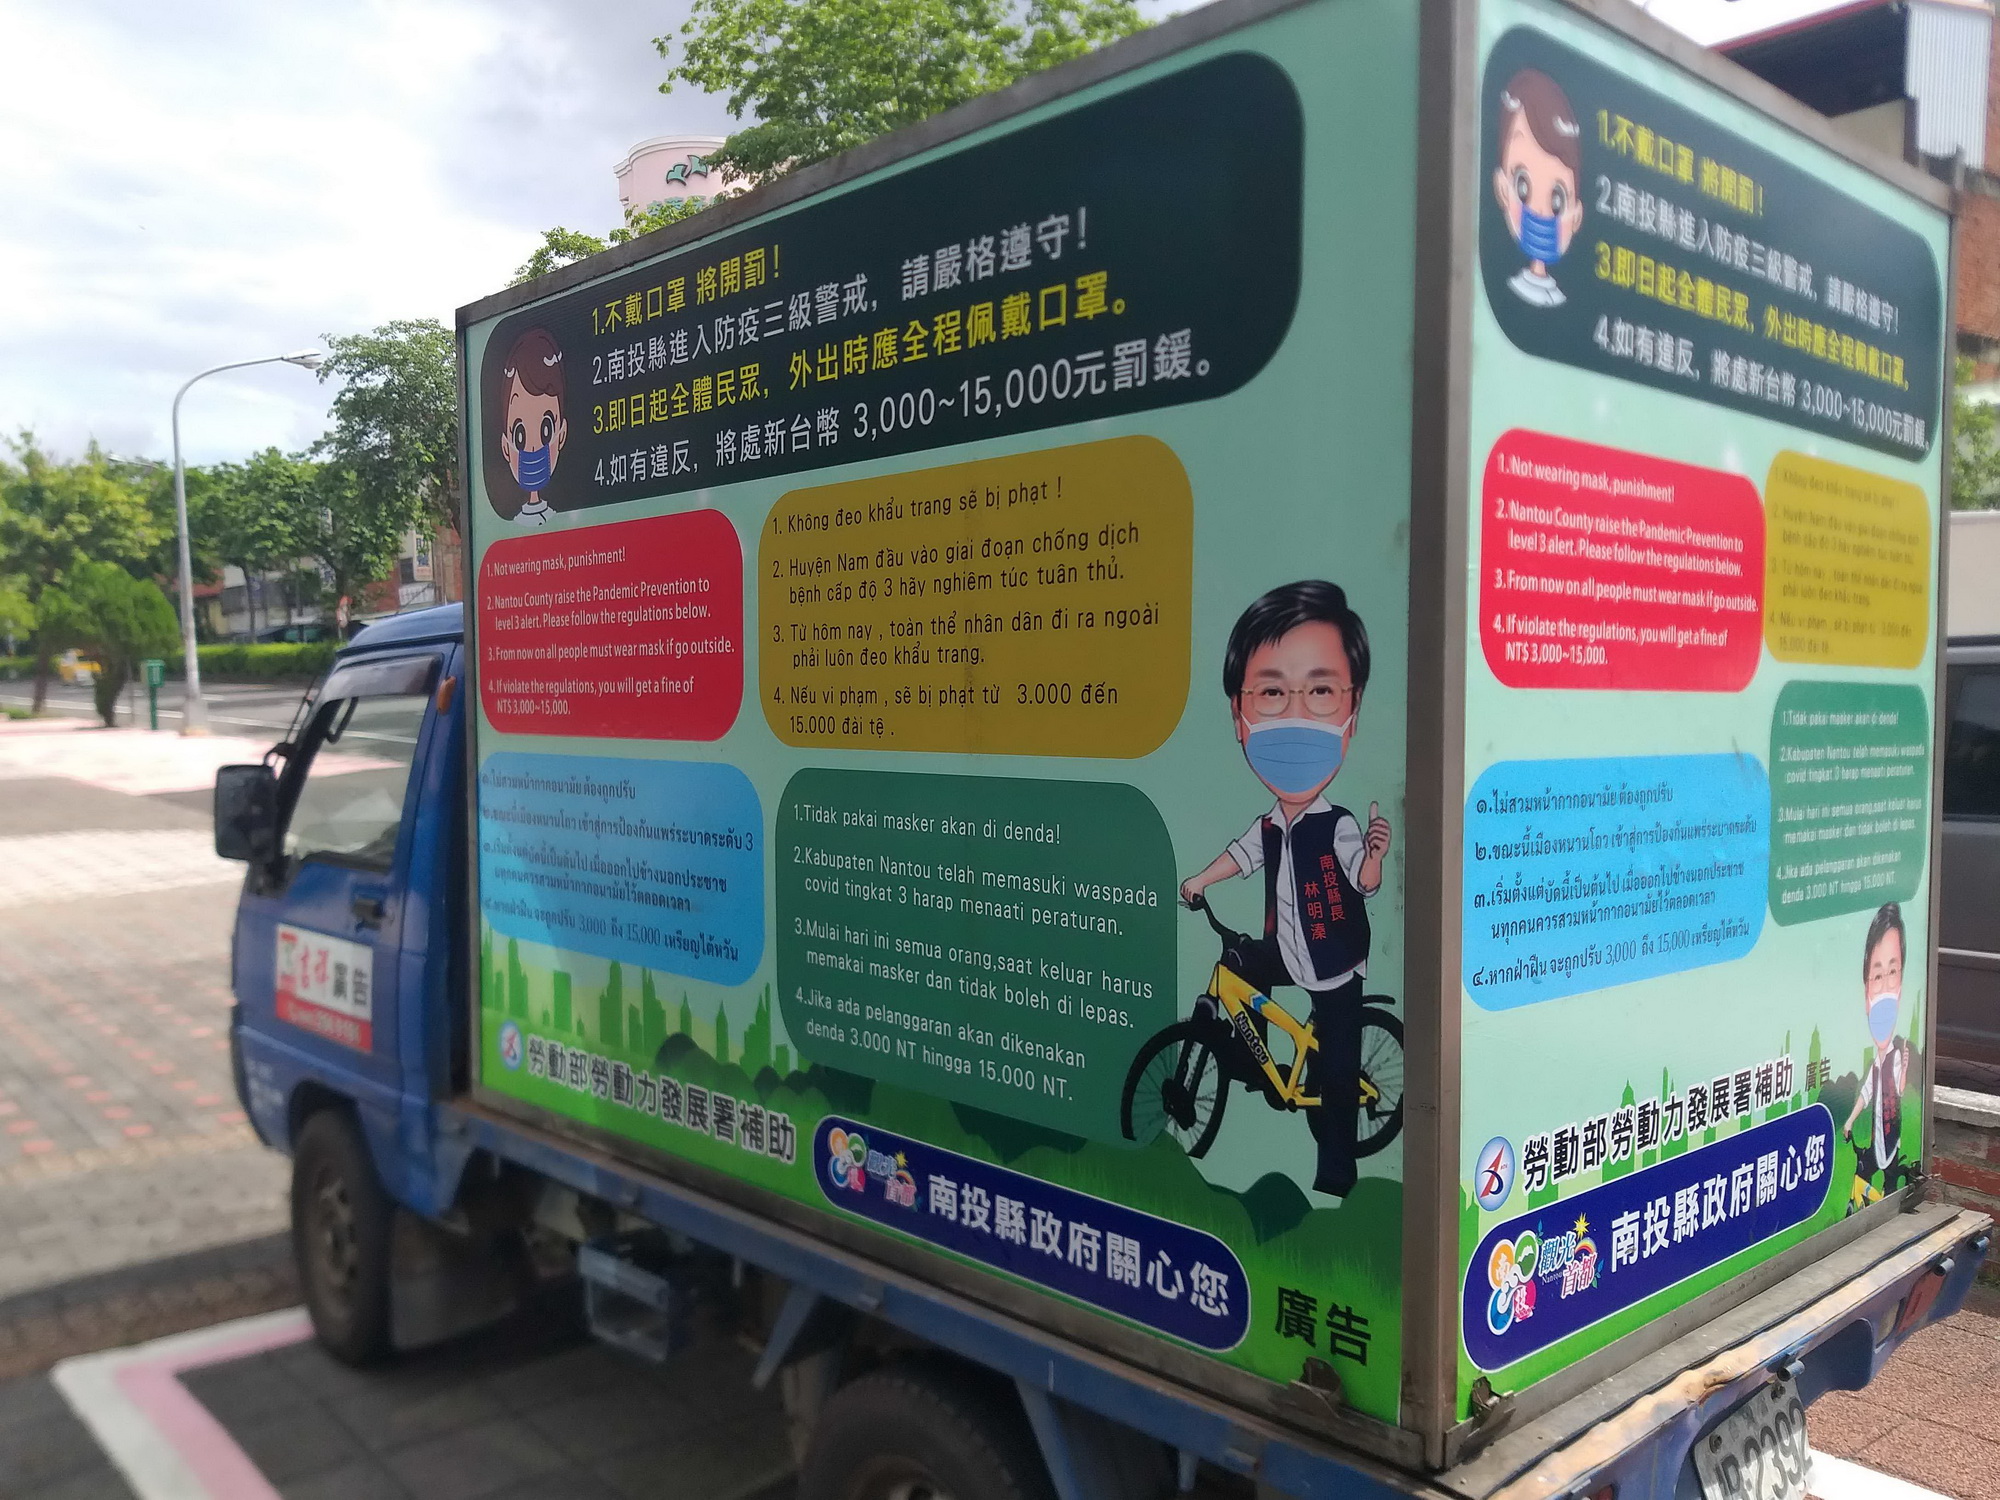  Nantou launches multilingual posters on vehicles to promote epidemic prevention instructions for migrant workers. Photo/Provided by Nantou County Government